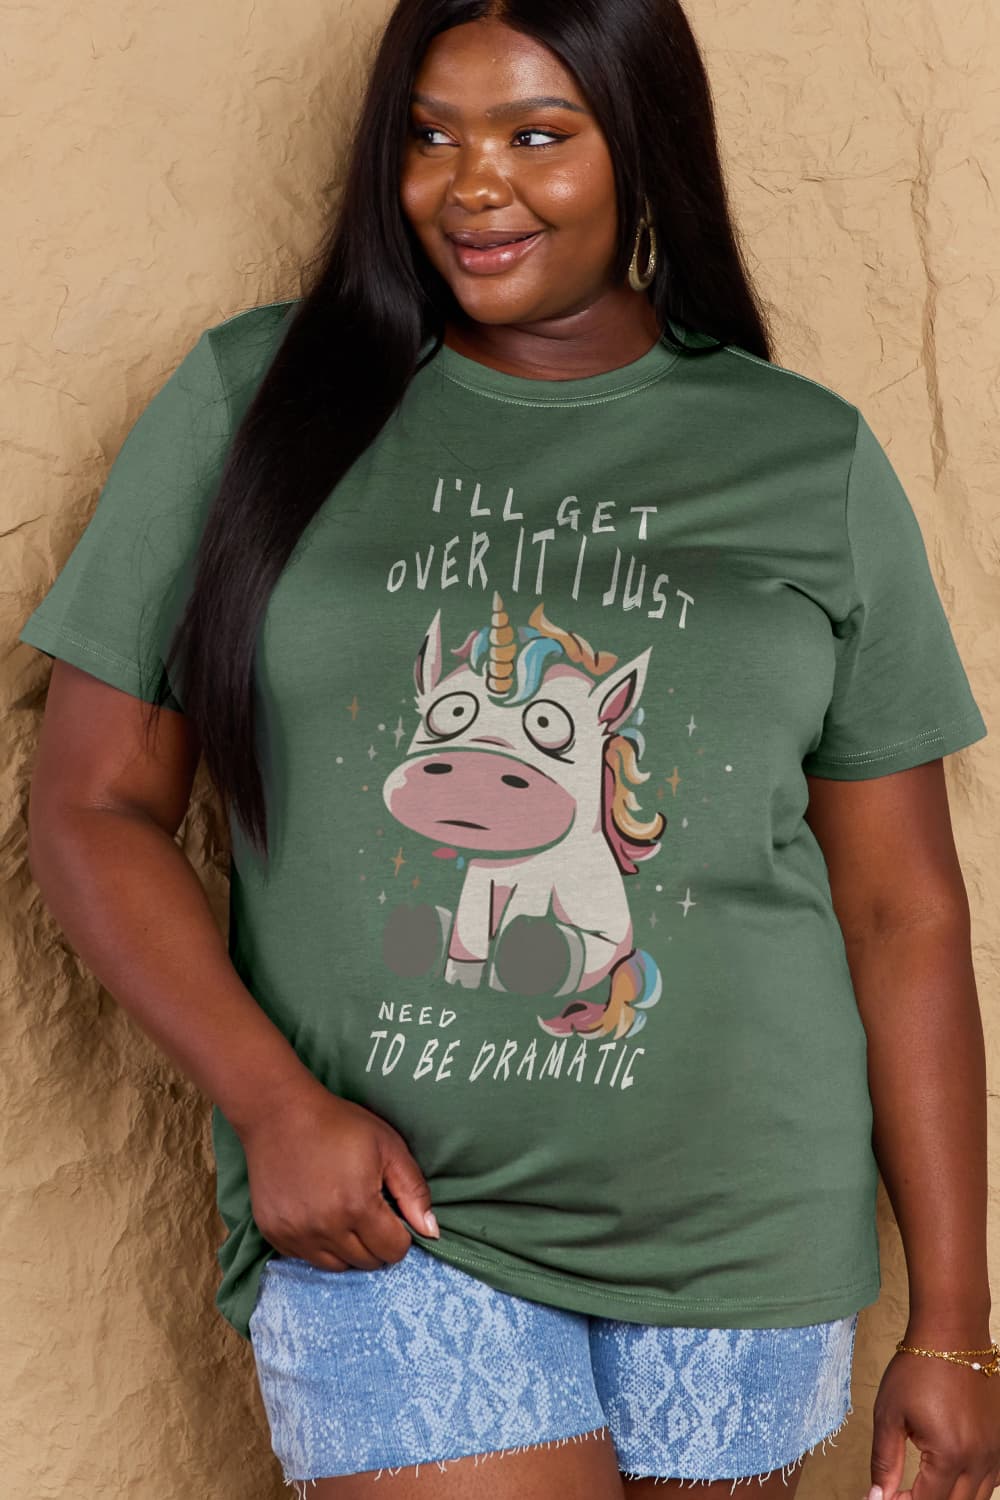 Full Size I’LL GET OVER IT I JUST NEED TO BE DRAMATIC Graphic Cotton Tee - T-Shirts - Shirts & Tops - 17 - 2024